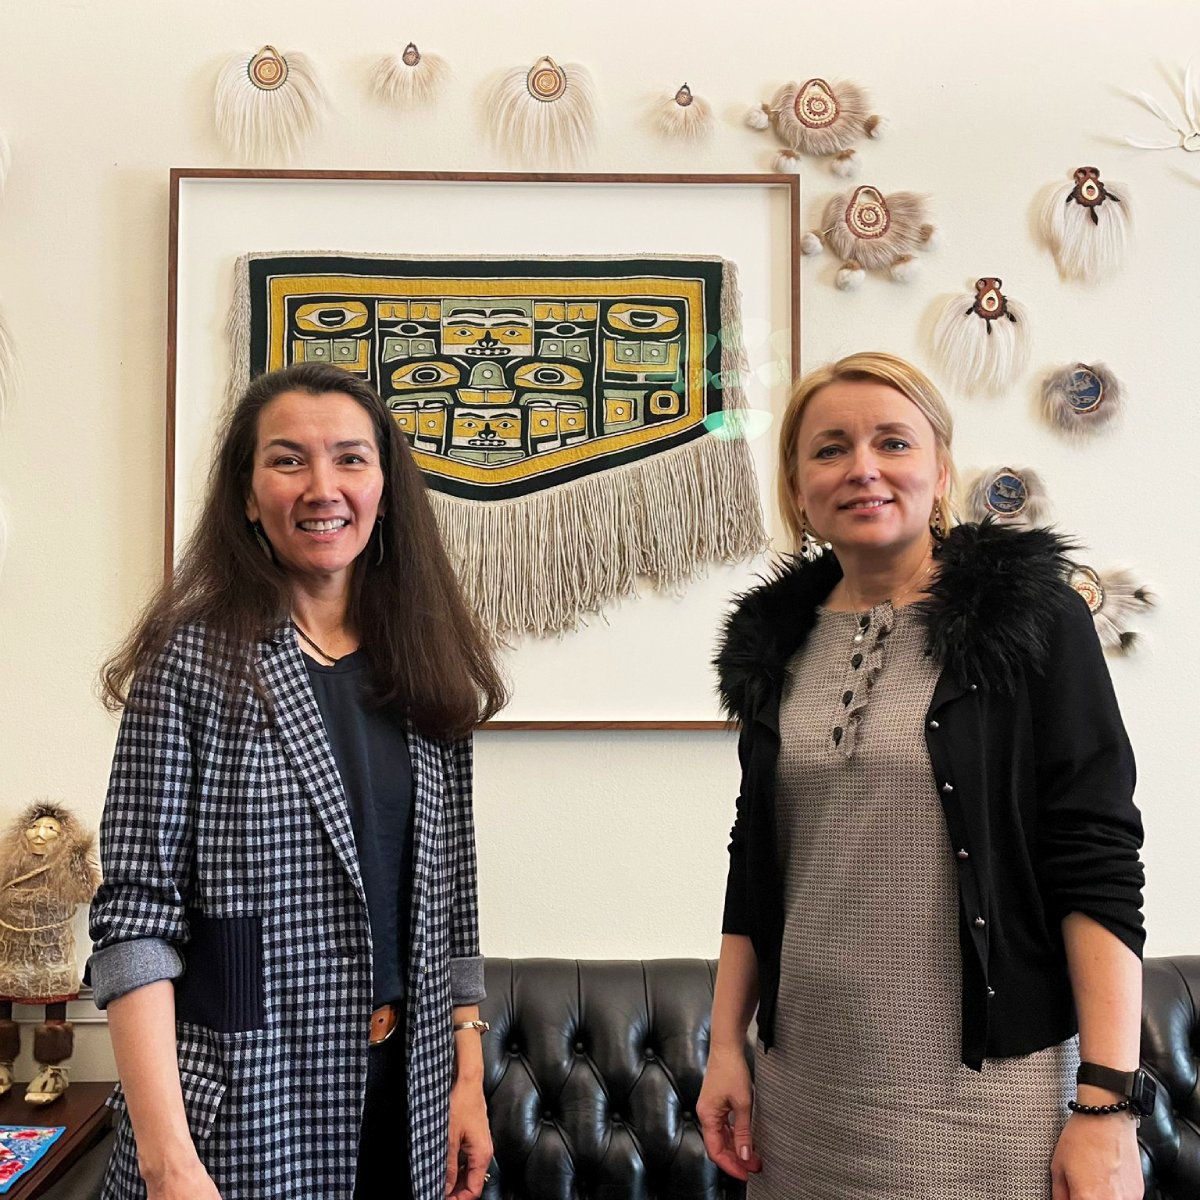 Happy to share my recent #Alaska experience with @Rep_Peltola, the first Alaska Native in Congress. The EU is in the #Arctic and already cooperating with Alaska in areas like urban development, climate, fisheries, and research. Connecting with Mary will only make this stronger.